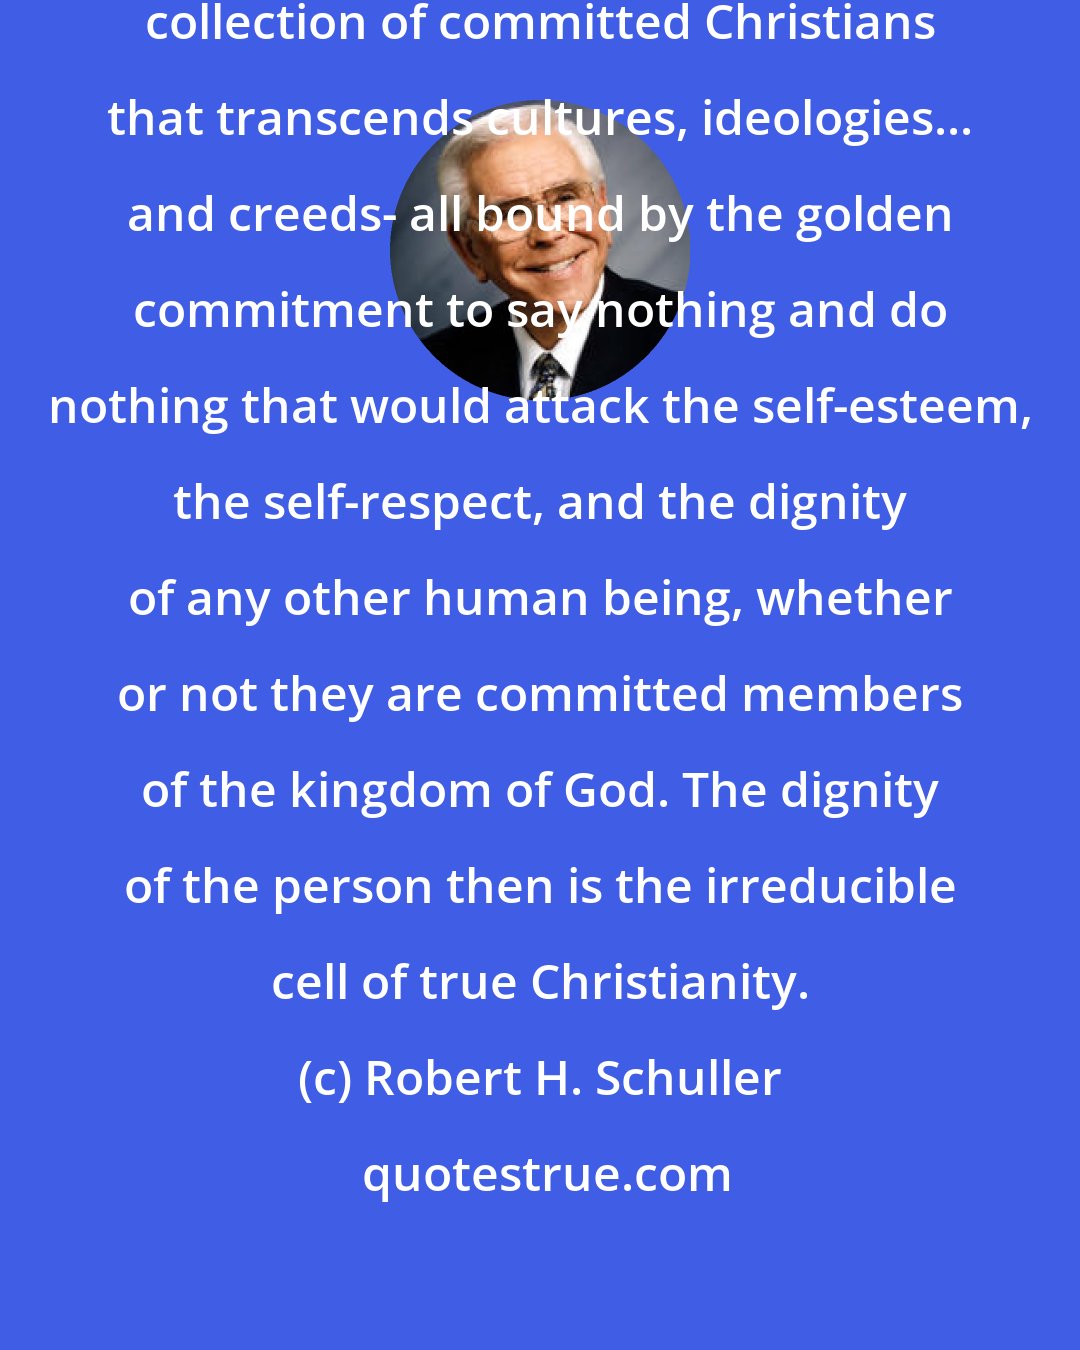 Robert H. Schuller: ...the kingdom of God is that invisible collection of committed Christians that transcends cultures, ideologies... and creeds- all bound by the golden commitment to say nothing and do nothing that would attack the self-esteem, the self-respect, and the dignity of any other human being, whether or not they are committed members of the kingdom of God. The dignity of the person then is the irreducible cell of true Christianity.